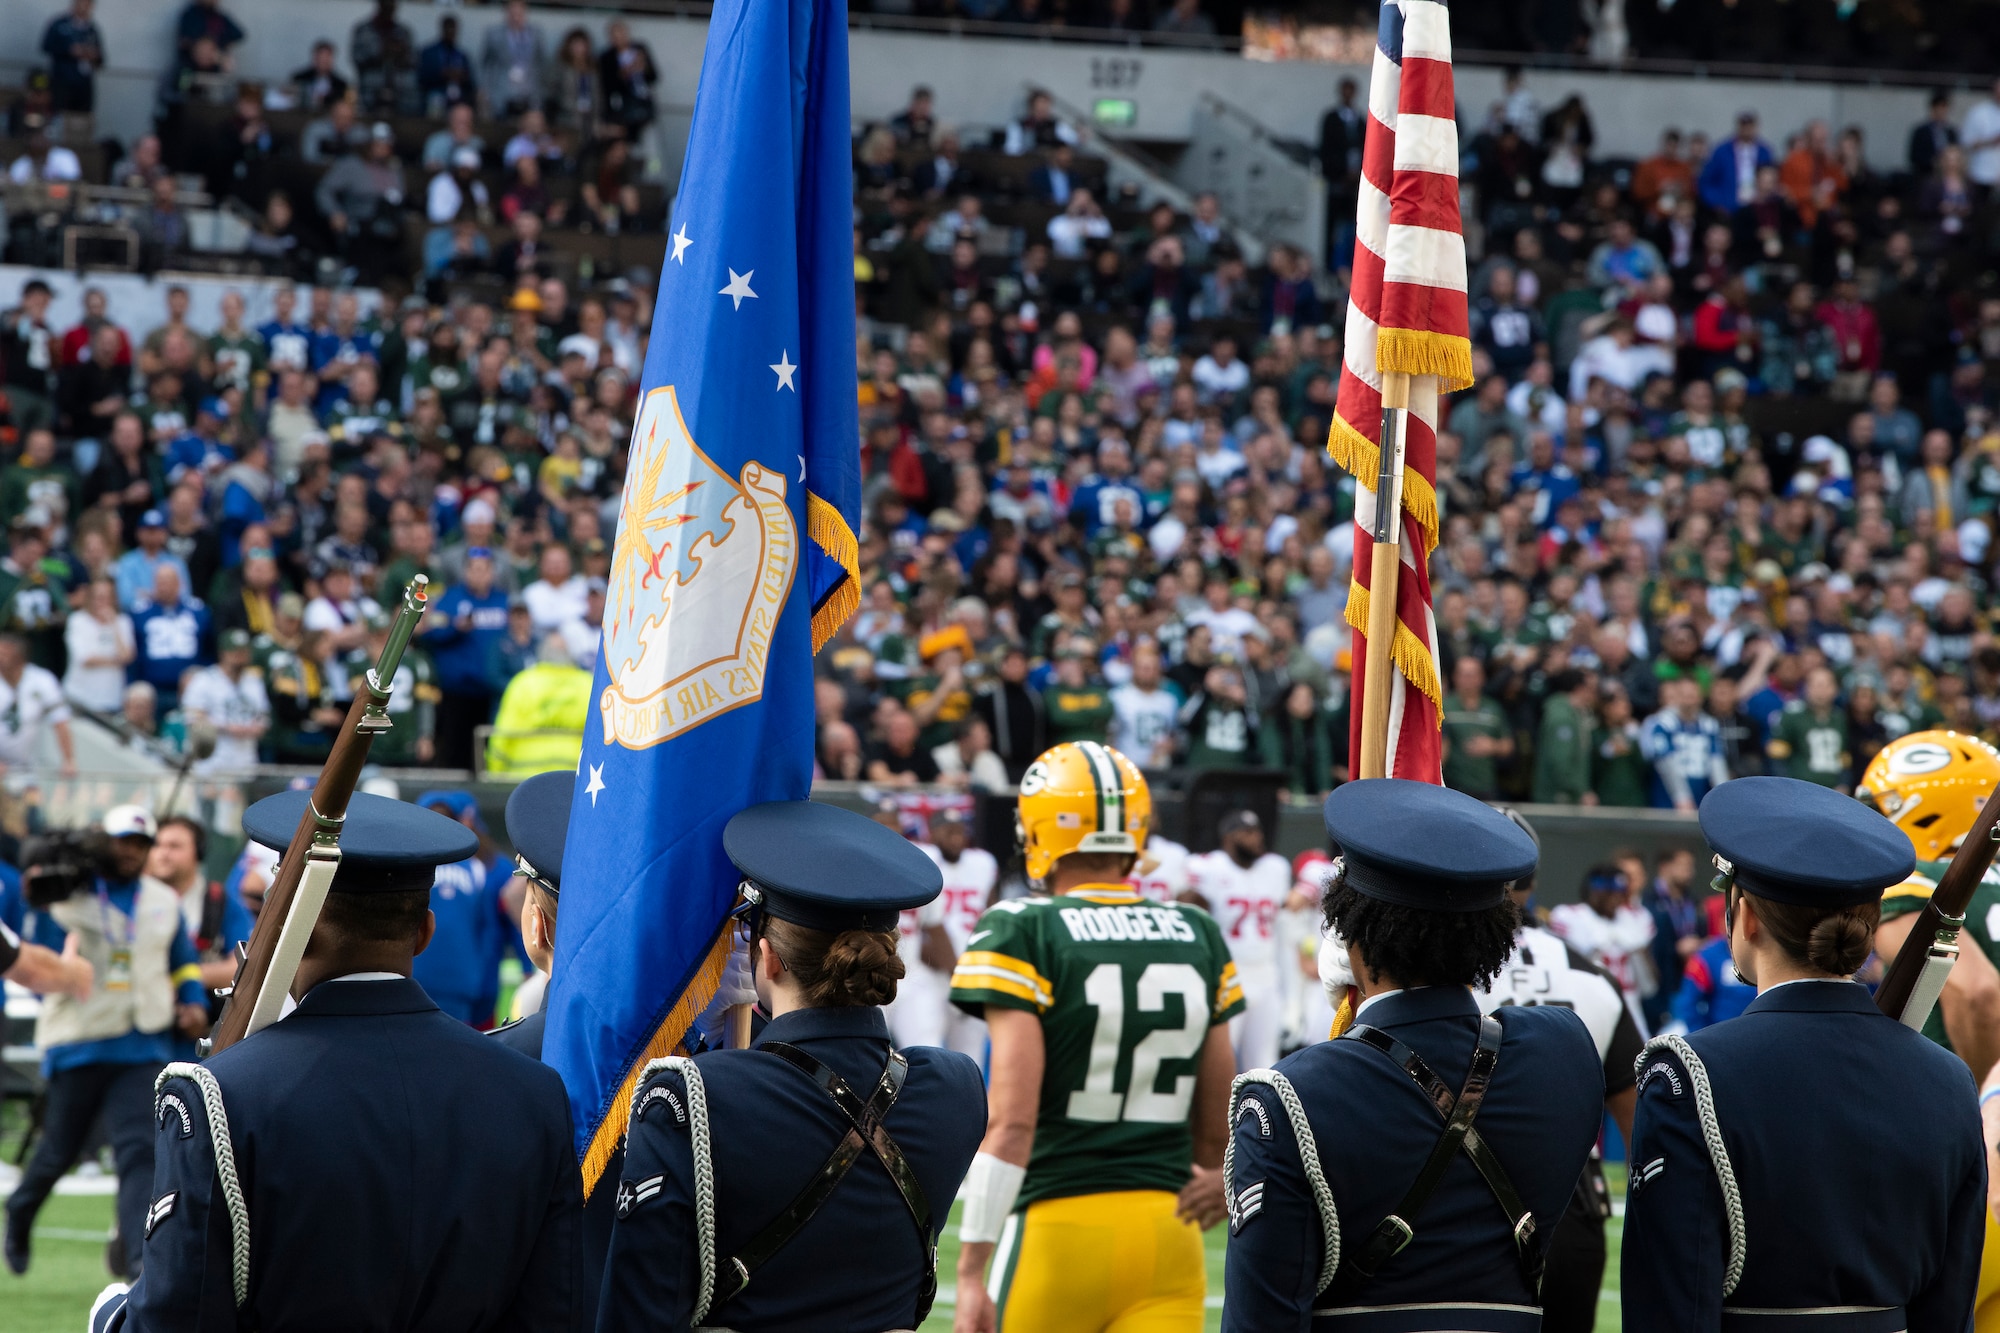 U.S. Airmen from the 48th Fighter Wing Honor Guard stand on the field as Aaron Rodgers, Green Bay Packers quarterback, walks by before the pre-game ceremony of the National Football League’s New York Giants vs. Green Bay Packers game at Tottenham Hotspur Stadium, in London, England, Oct. 9, 2022. This was the second NFL game in England this year which featured Airmen from Royal Air Force Mildenhall and RAF Lakenheath unfurling a U.S. Flag during the pre-game ceremony. (U.S. Air Force photo by Tech. Sgt. Anthony Hetlage)